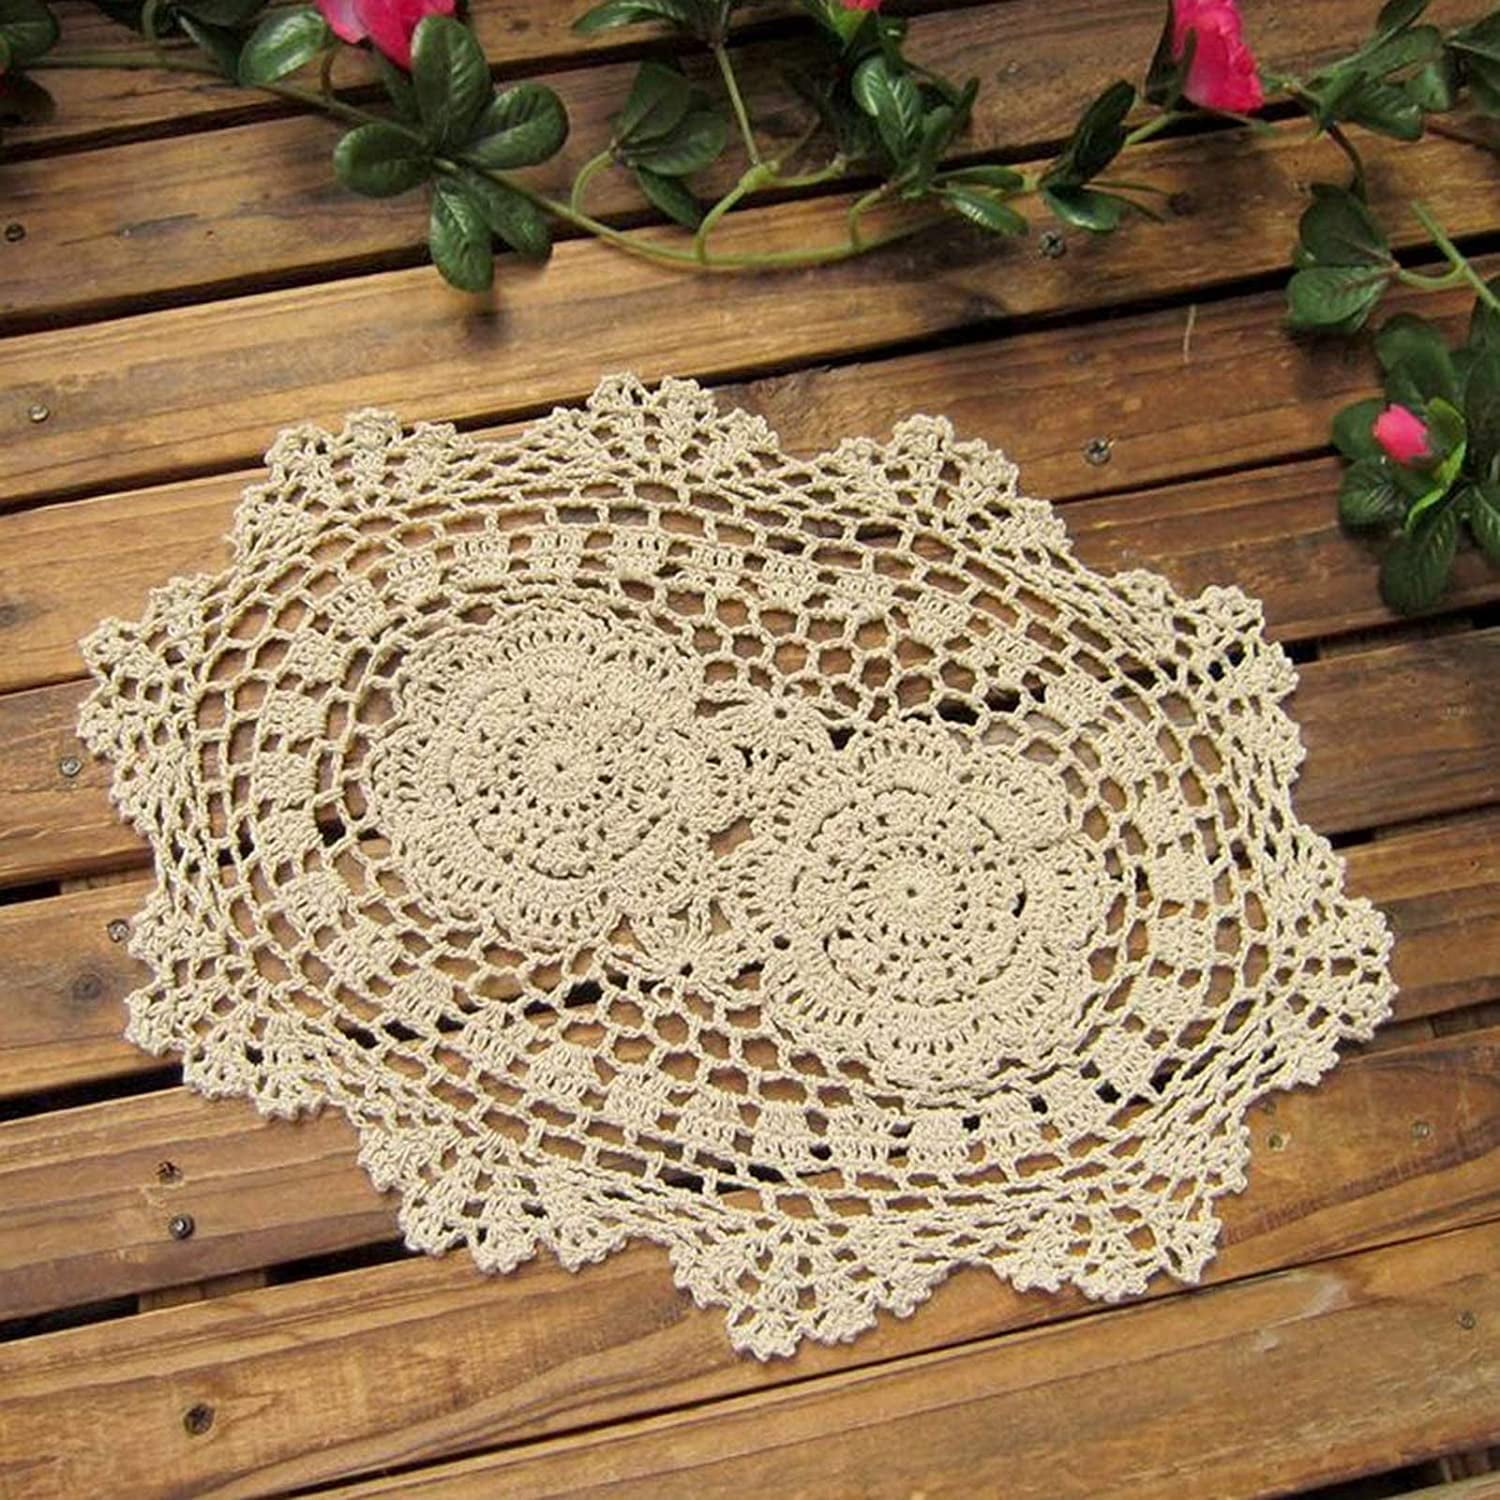 Doily 11" Field of Daisies Lace Placemat  Daisy  Green 